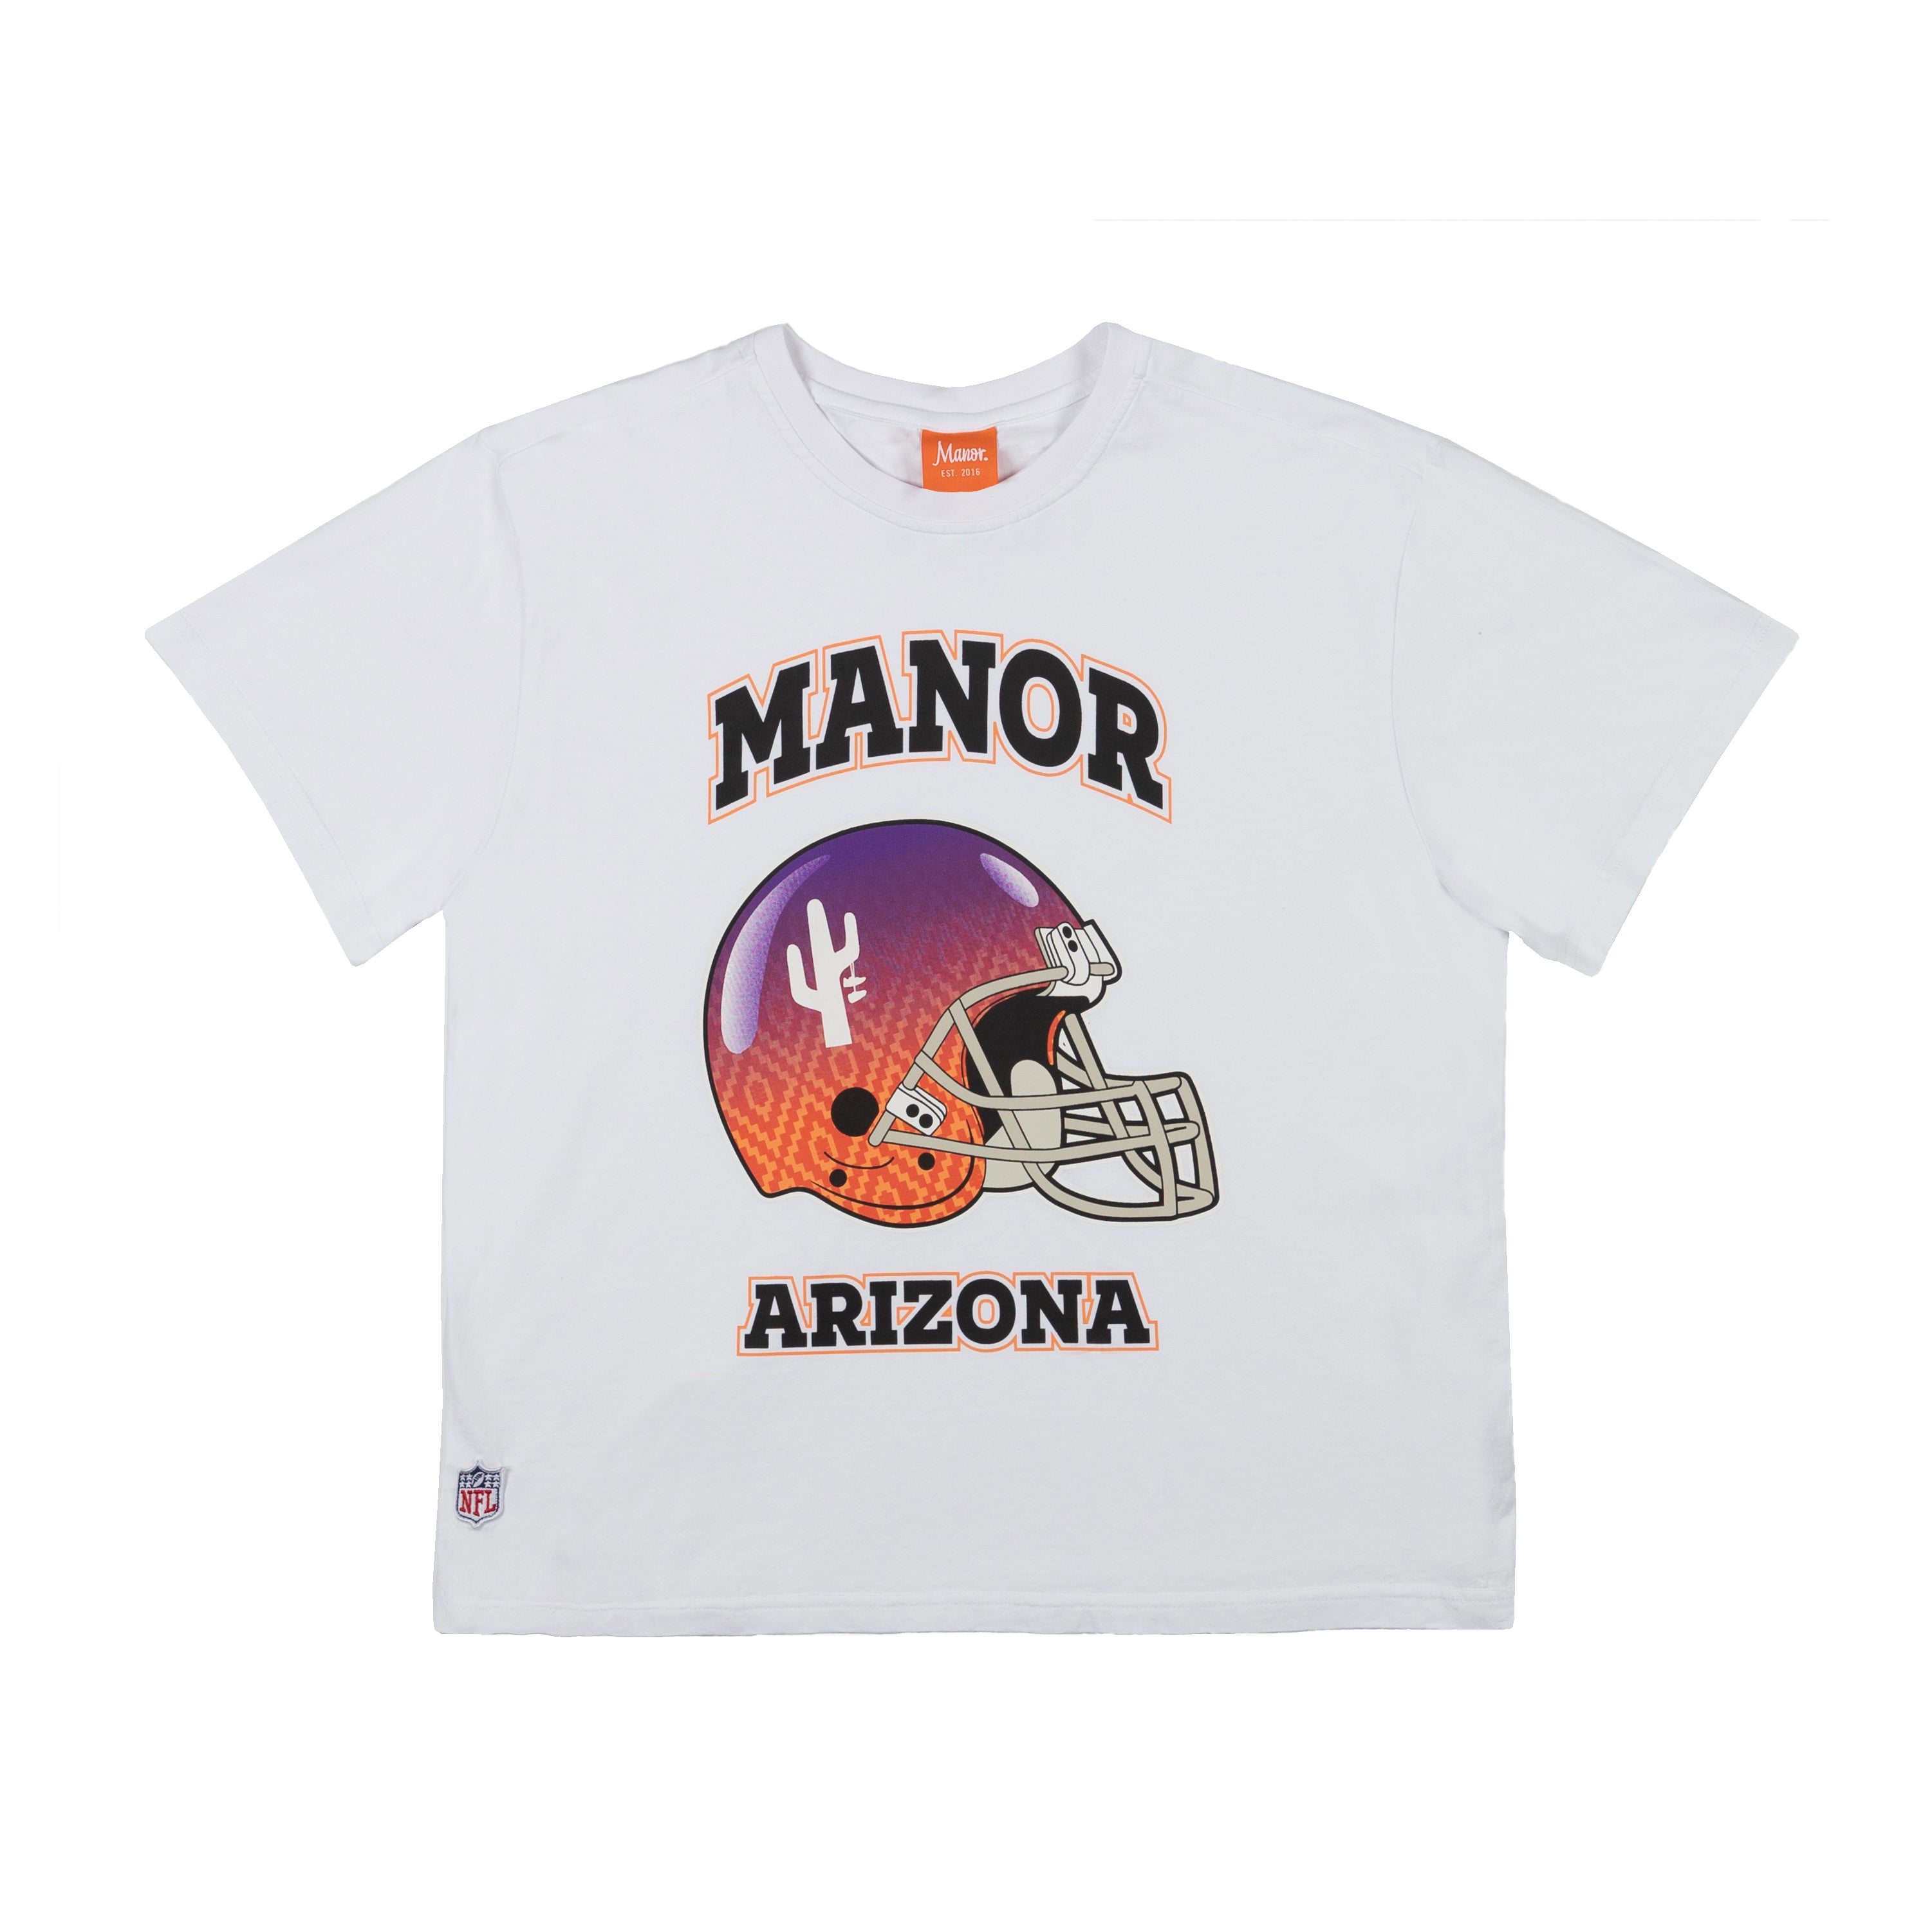 Manor x NFL Origins Collection Release Information